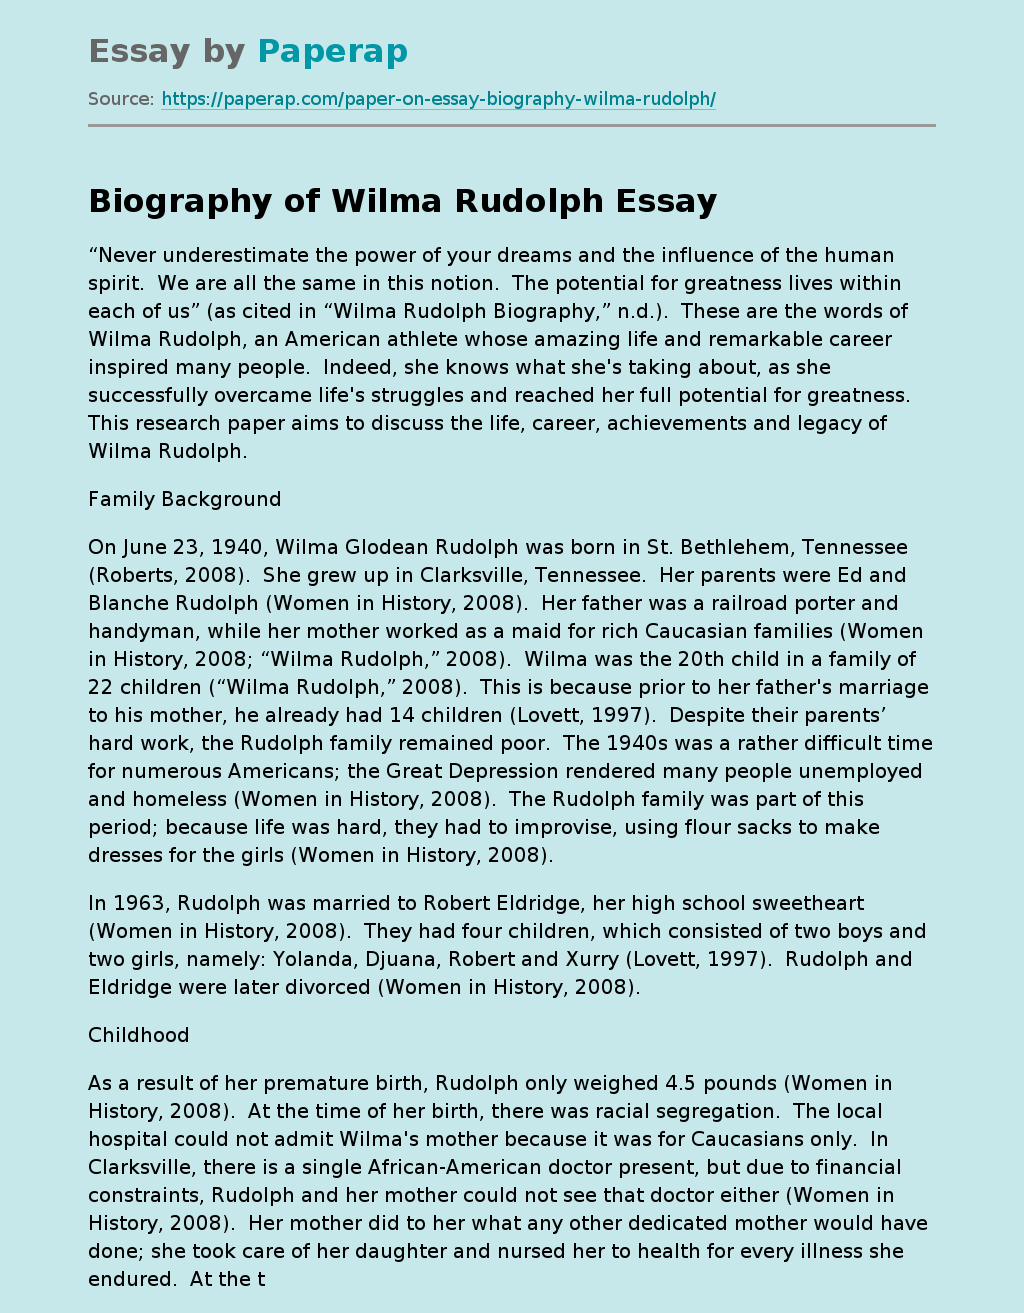 Biography of Wilma Rudolph